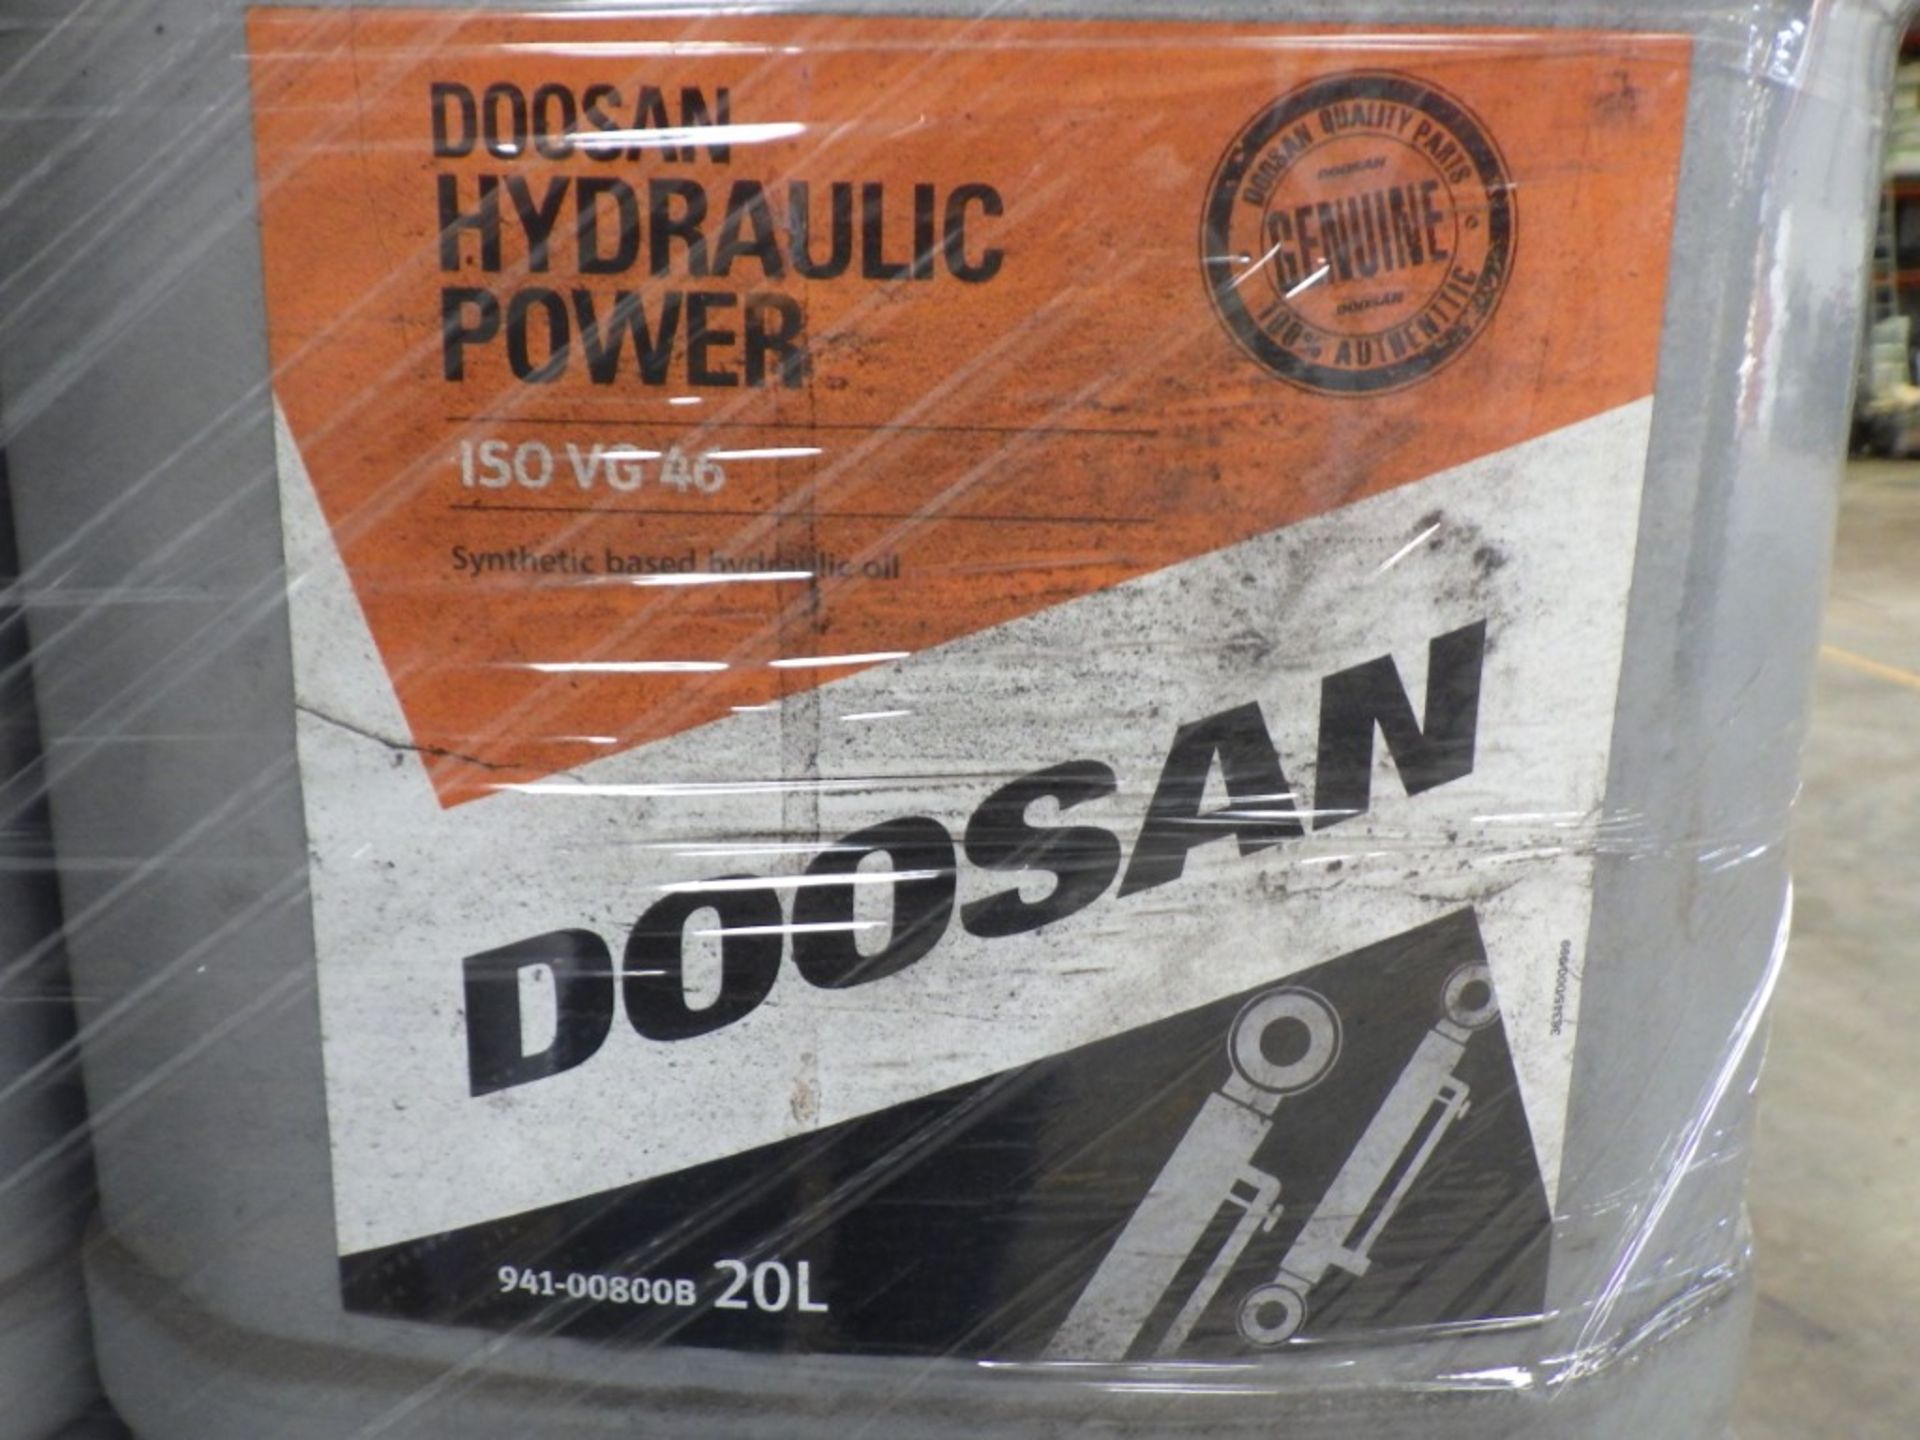 DOOSAN ISO VG 46 HYDRAULIC OIL 20L SYNTHETIC BASED, 20 L CONTAINERS (31 OF)